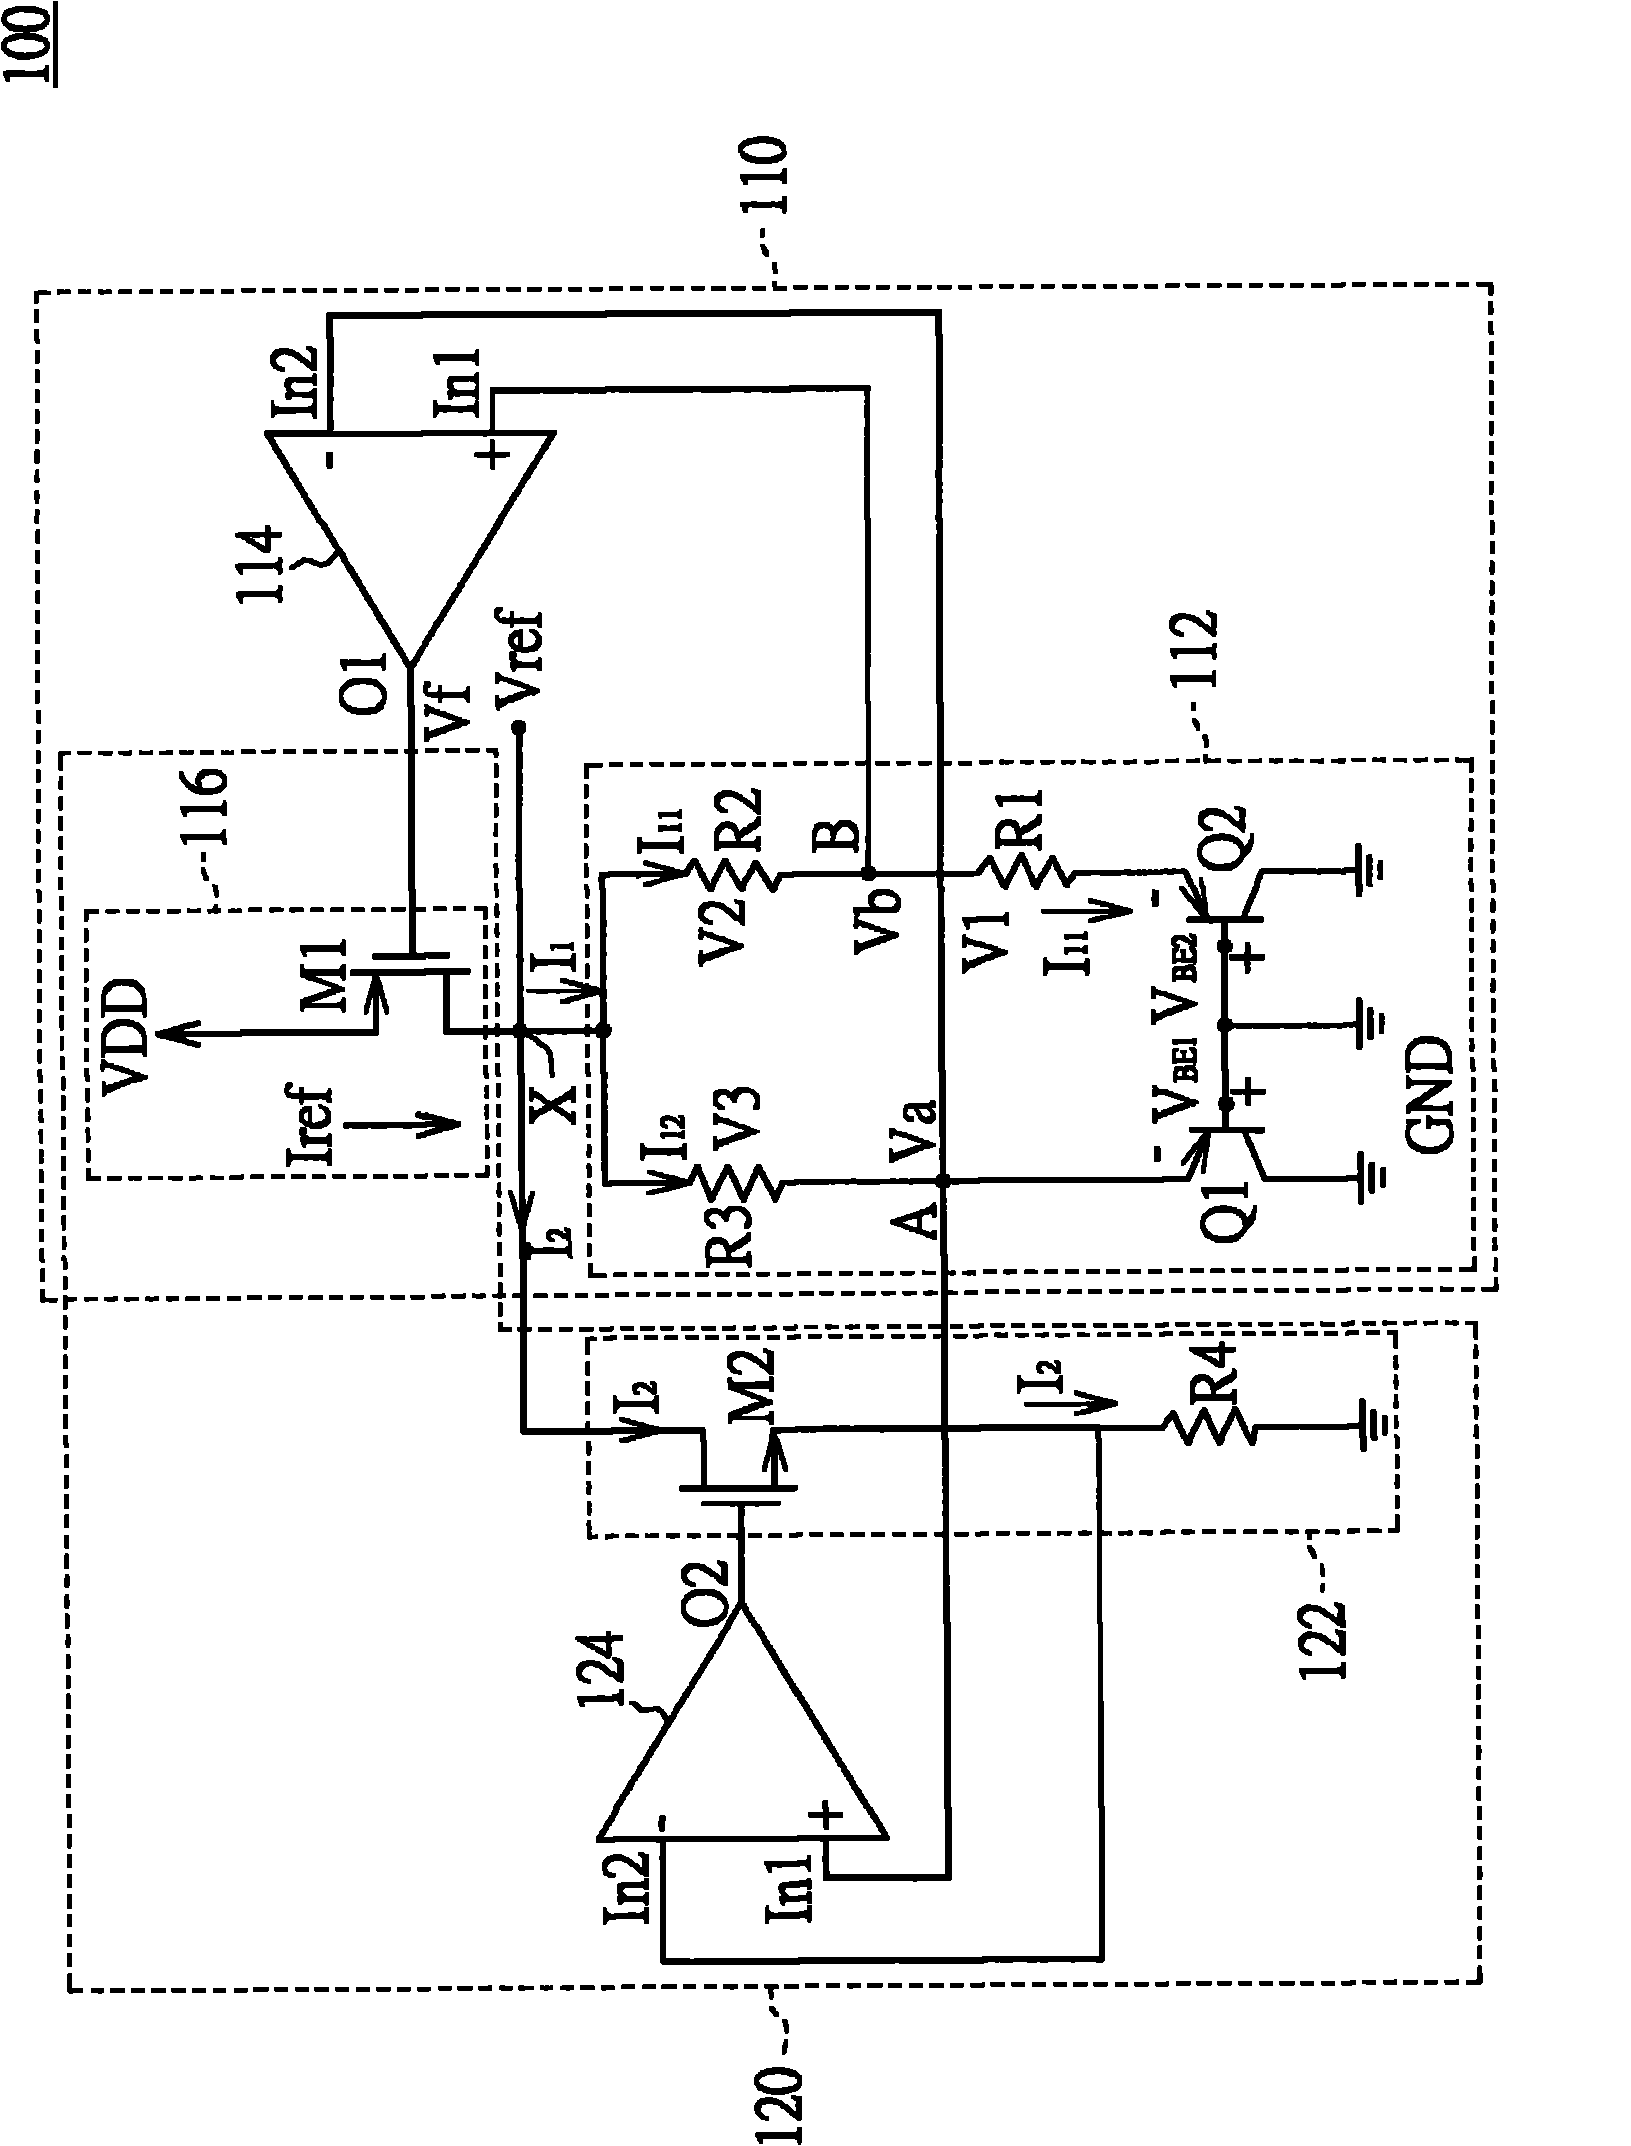 Reference voltage and reference current generating circuit and method